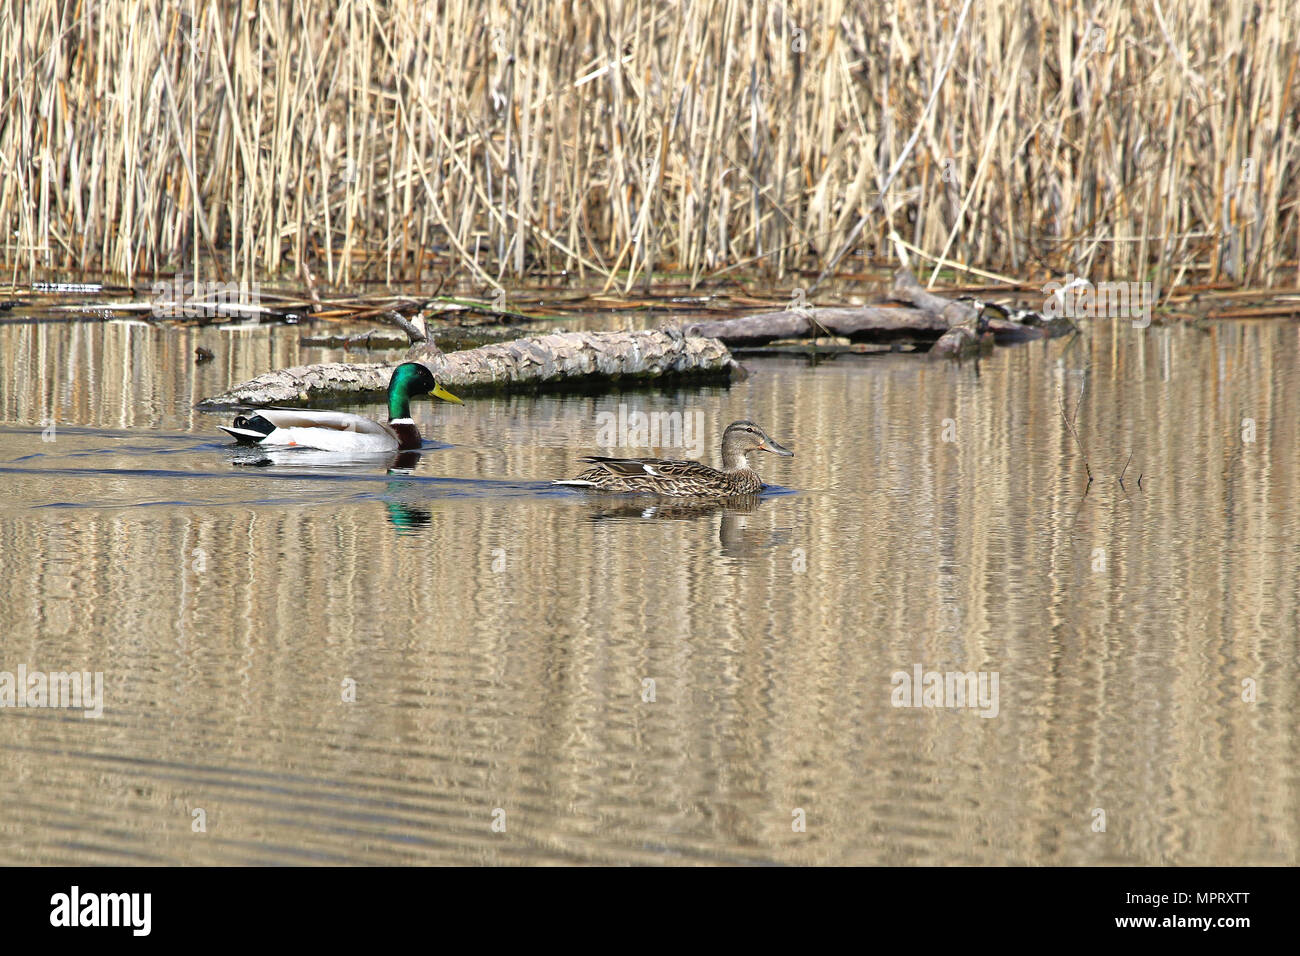 pair of mallards male and female ducks Latin name Anas platyrhynchos family anatidae swimming in the Colfiorito nature reserve in Italy Stock Photo